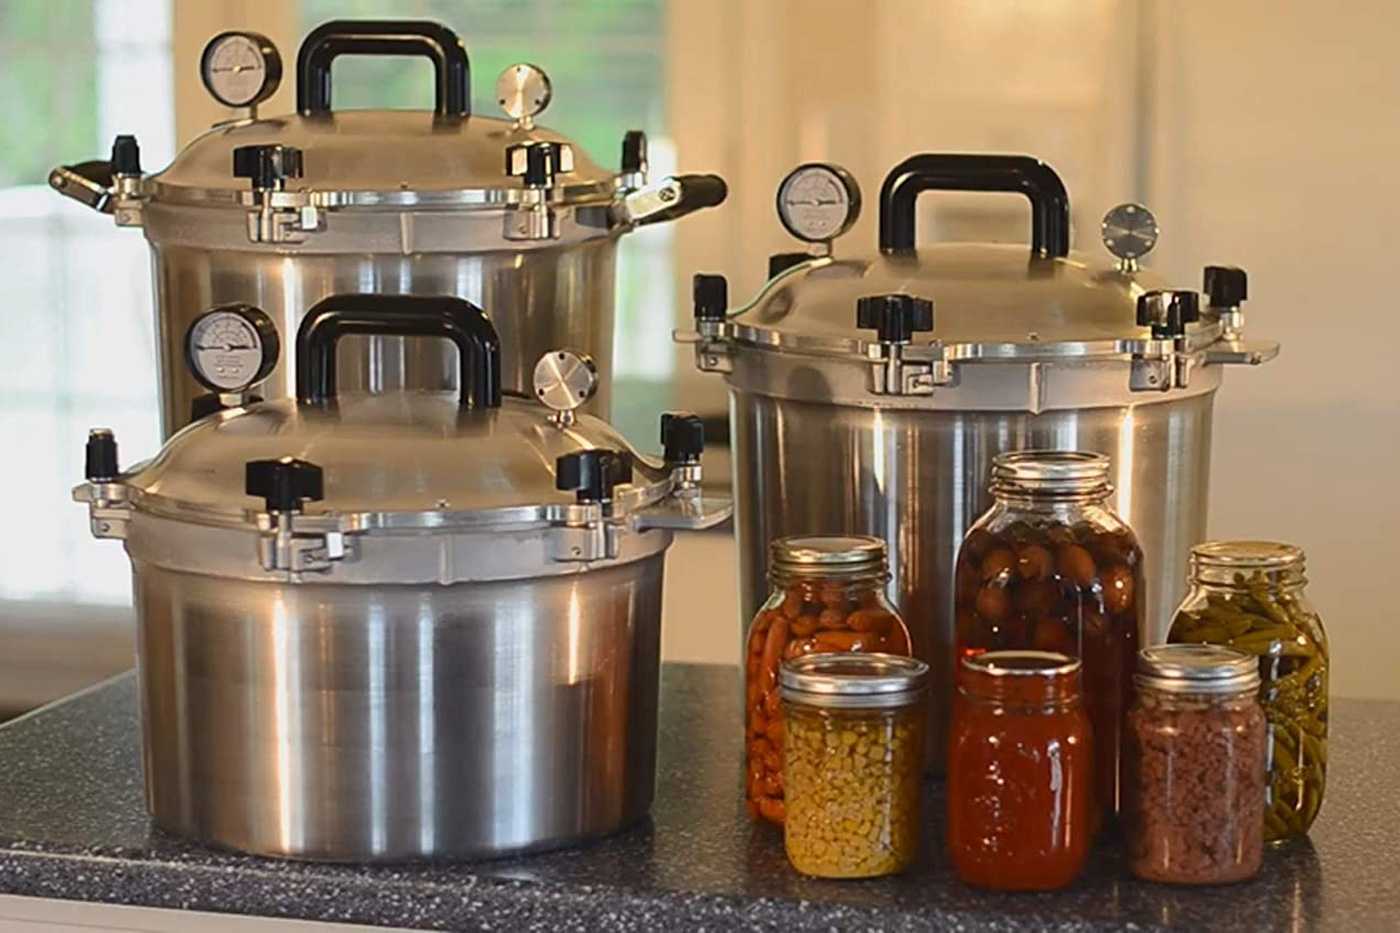 Stovetop pressure cookers with jars of pickles on a table